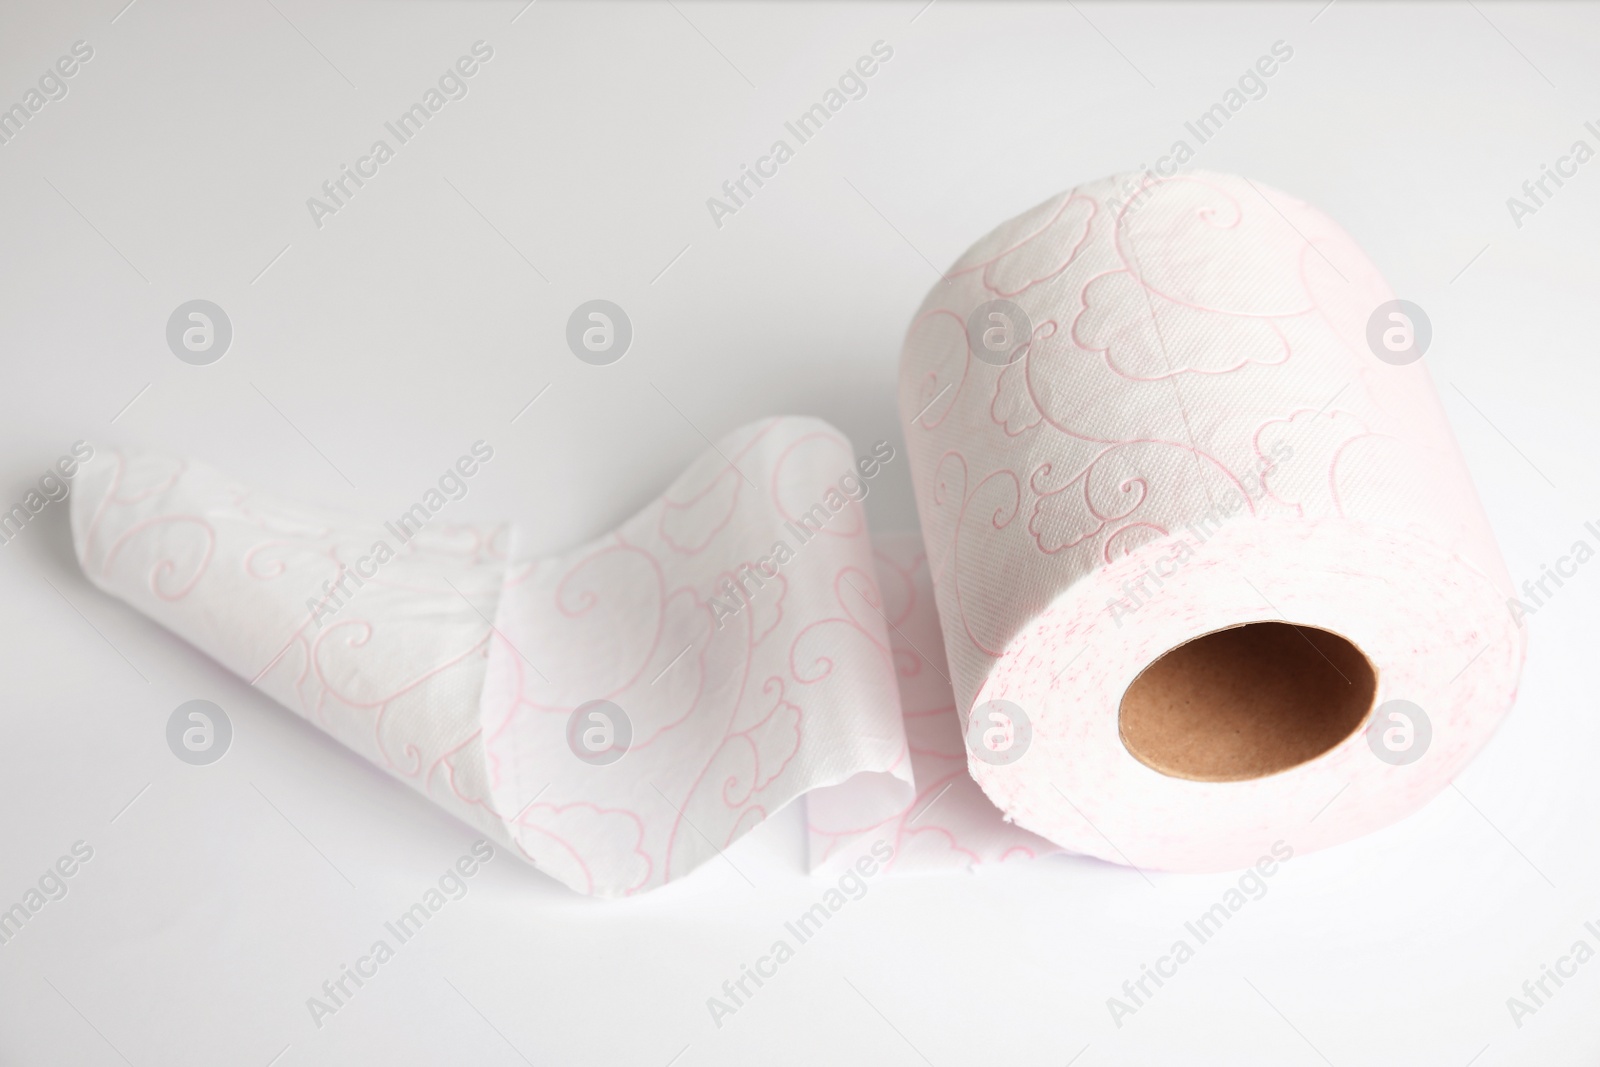 Photo of Toilet paper roll on white background. Personal hygiene